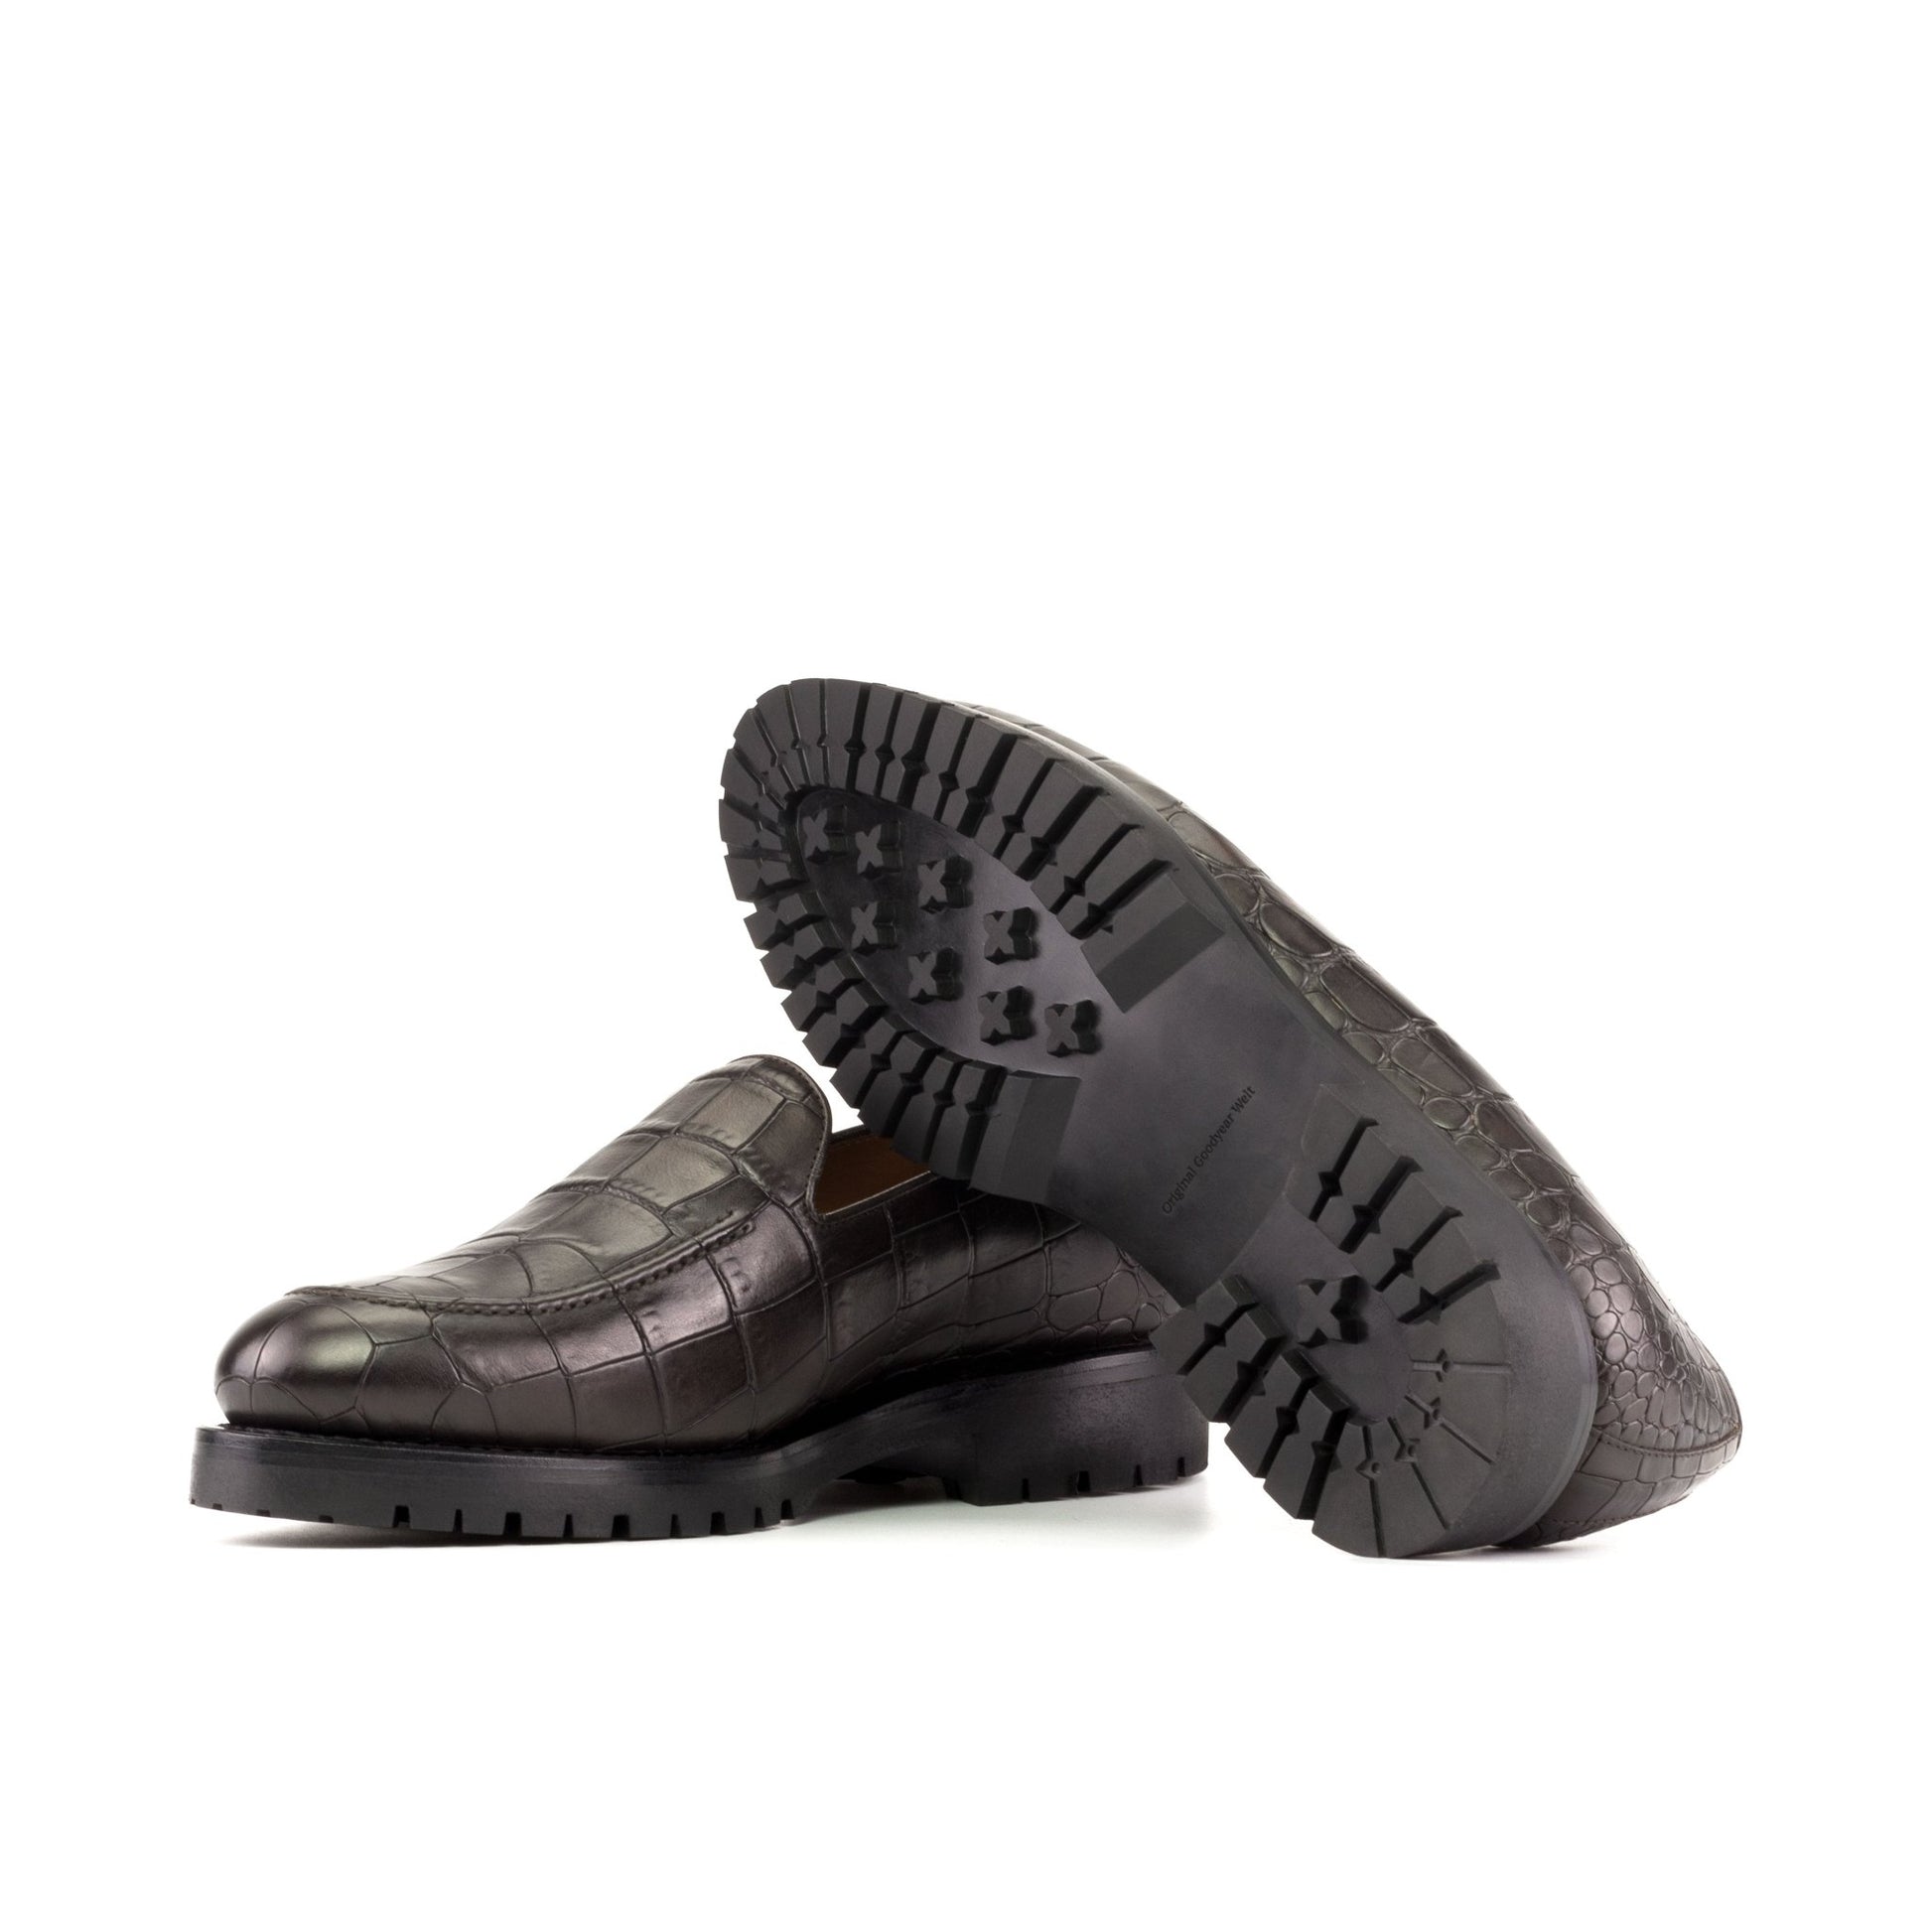 Loafer in Dark Brown Croco - Zatorres | Free Shipping on orders over $200